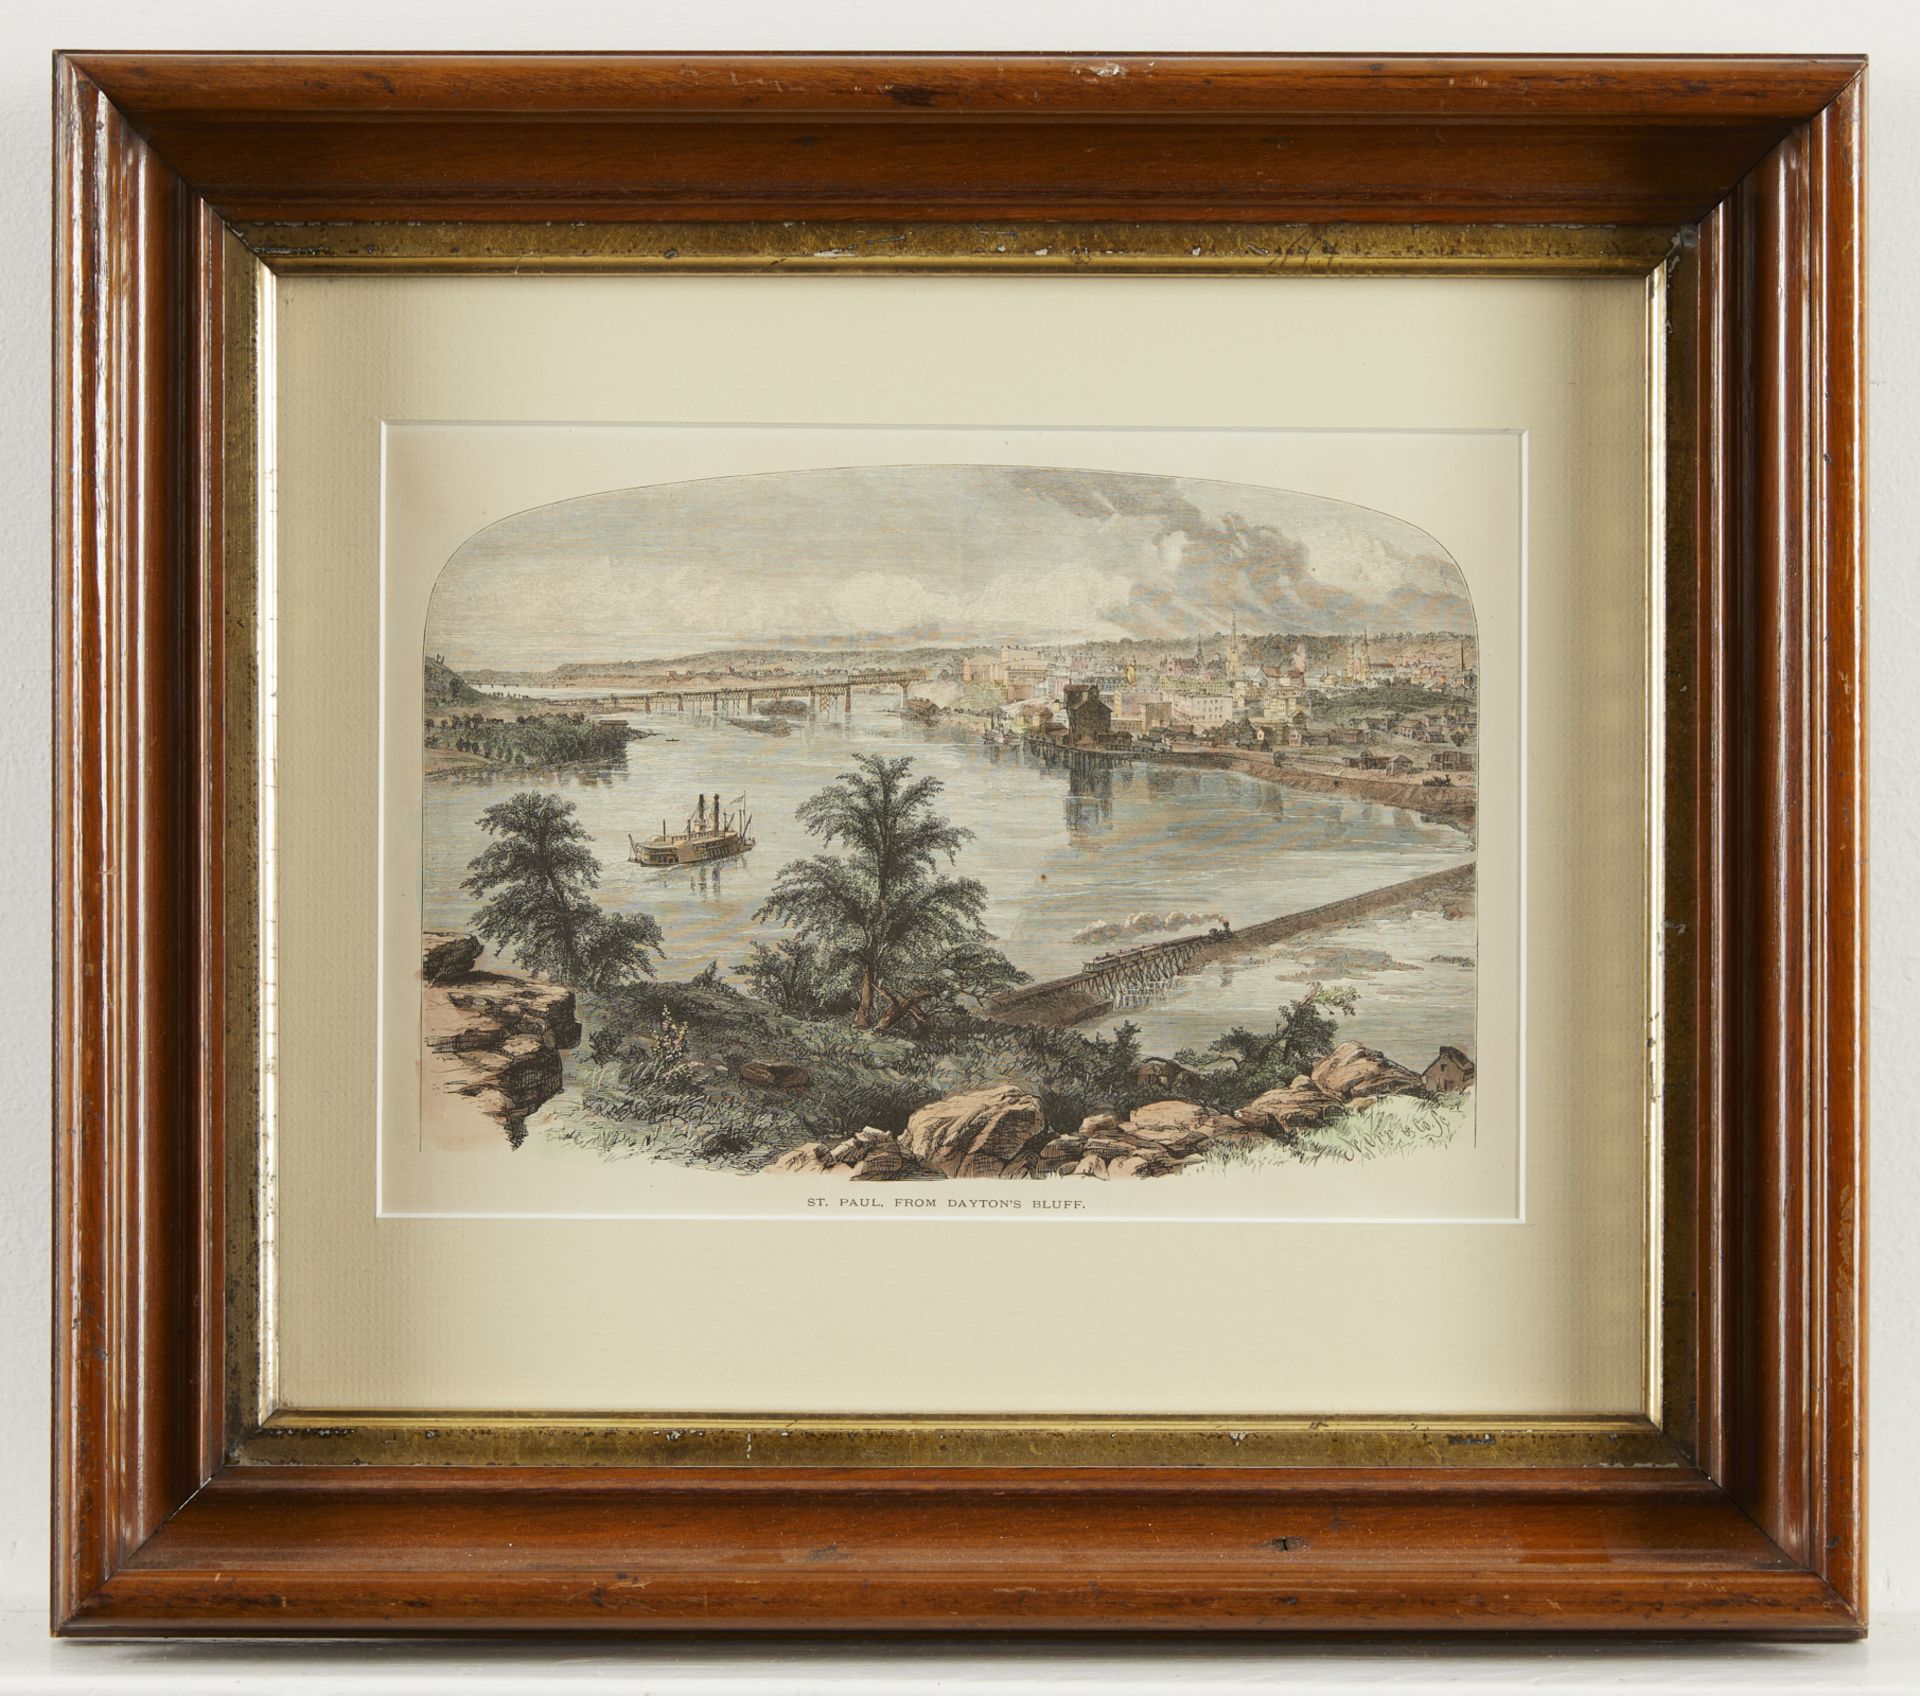 "St. Paul, from Dayton's Bluff" Engraving 1874 - Image 2 of 6